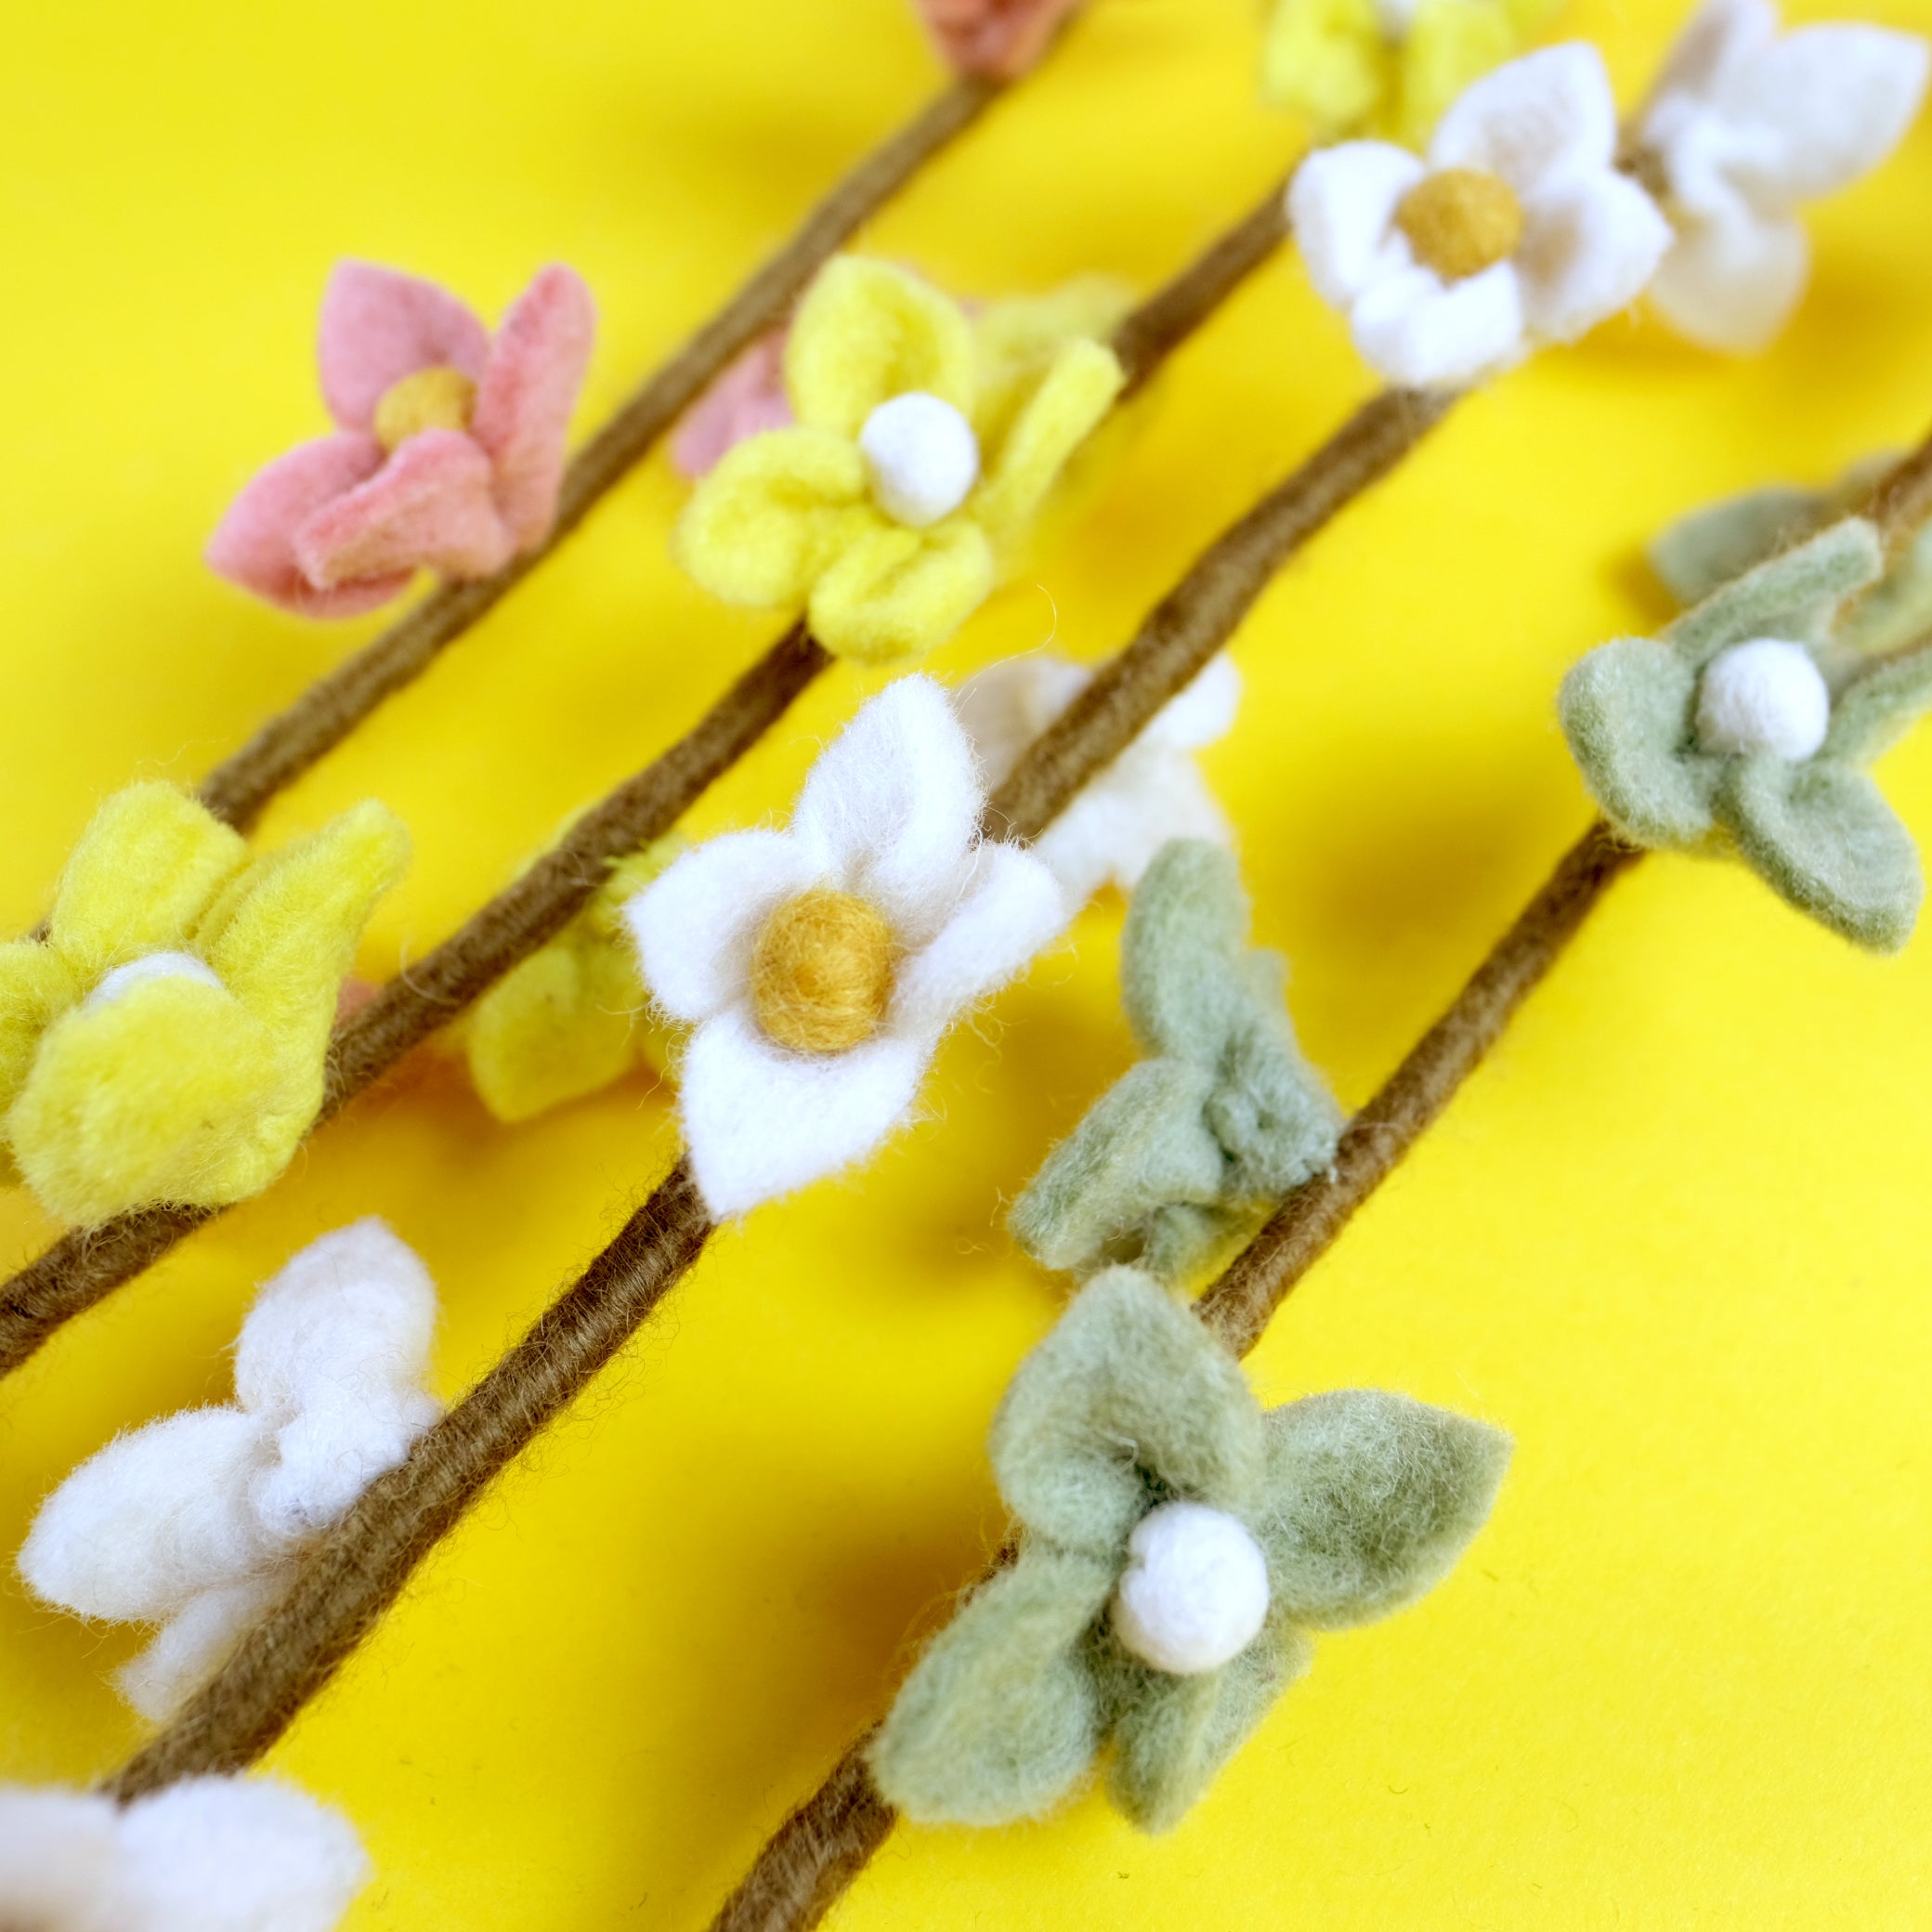 Flowers on Stalk (Available in 4 colors)